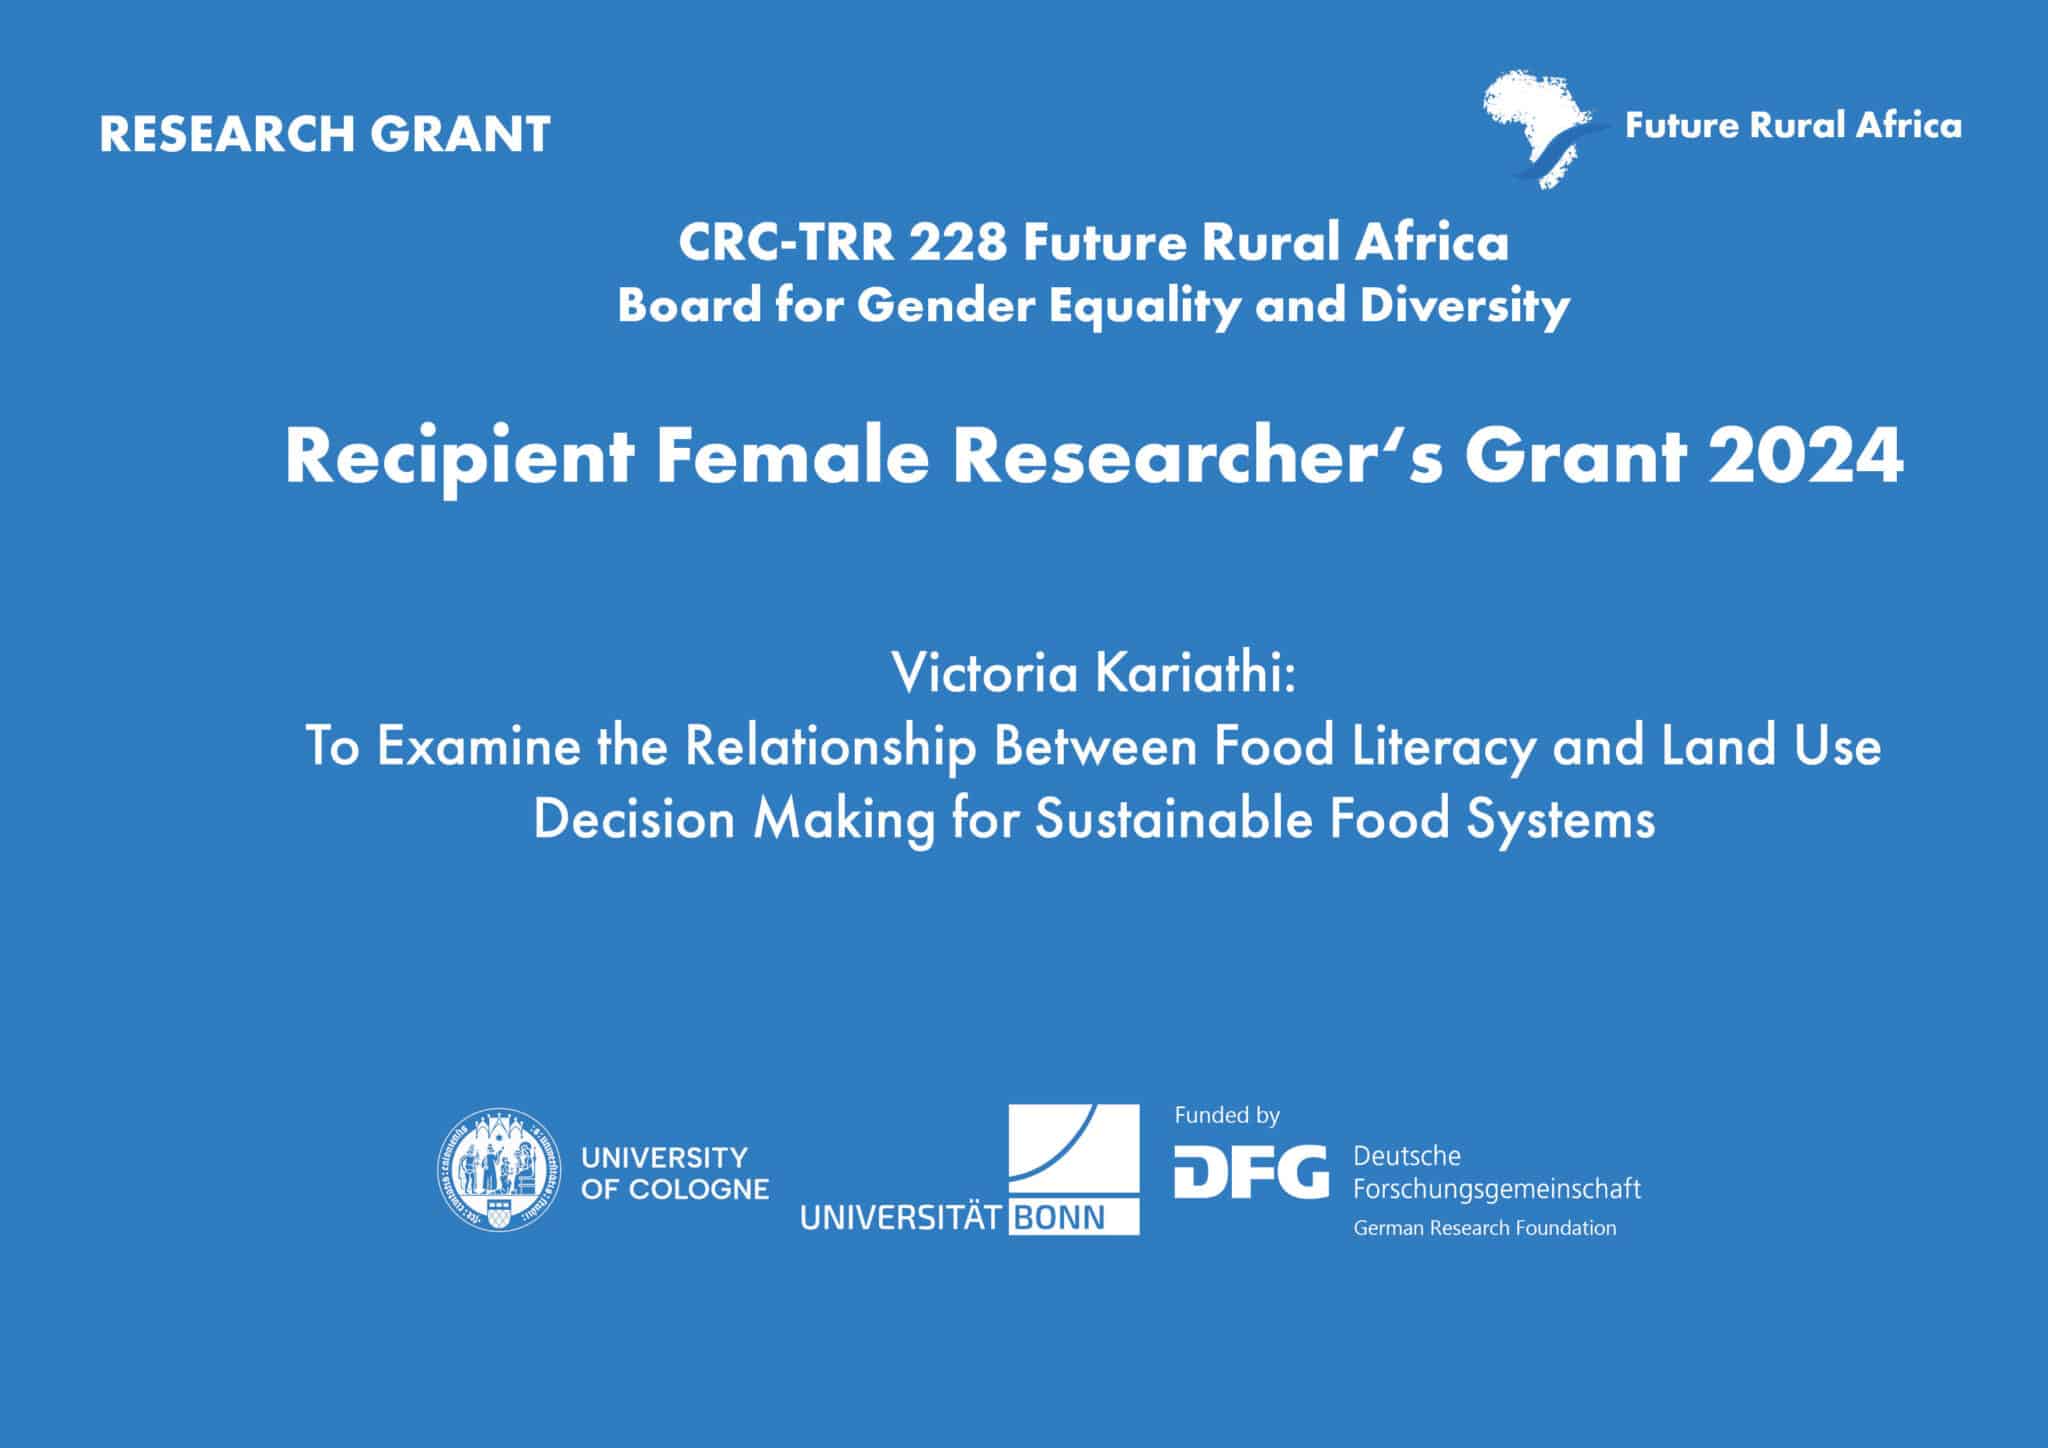 Web Cover announcing the recipient of the future rural africa female researcher's grant 2024